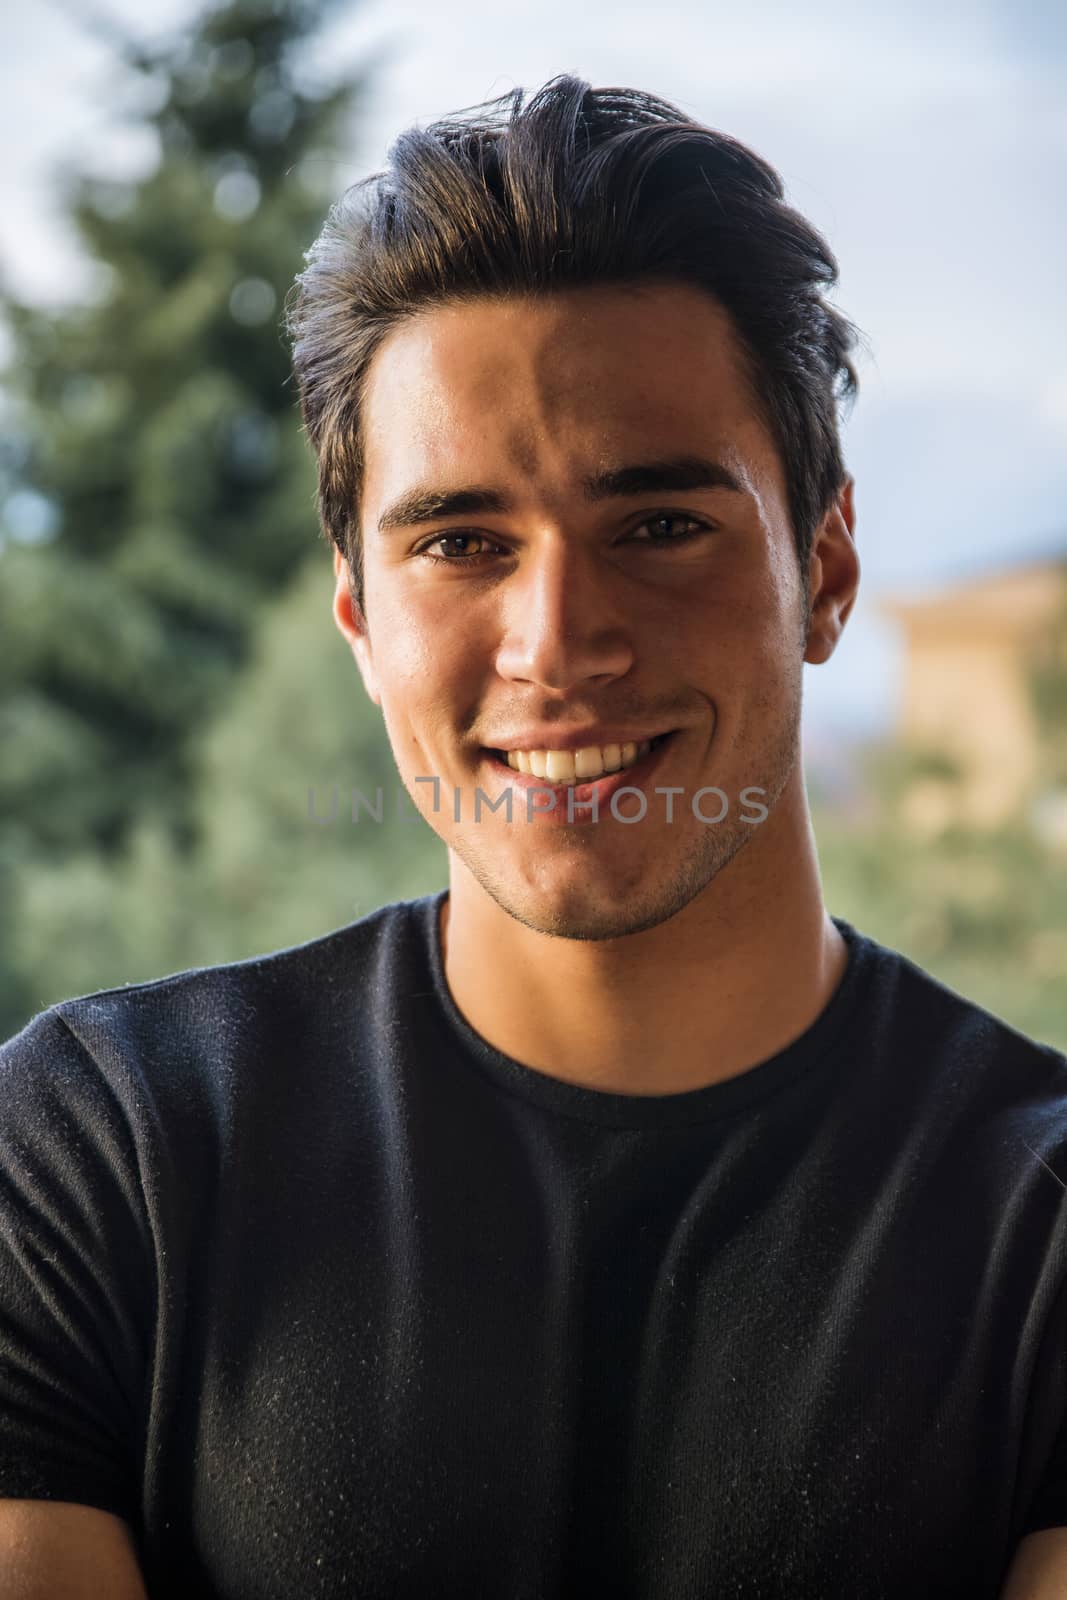 Headshot of handsome attractive young man smiling and looking at camera outdoor